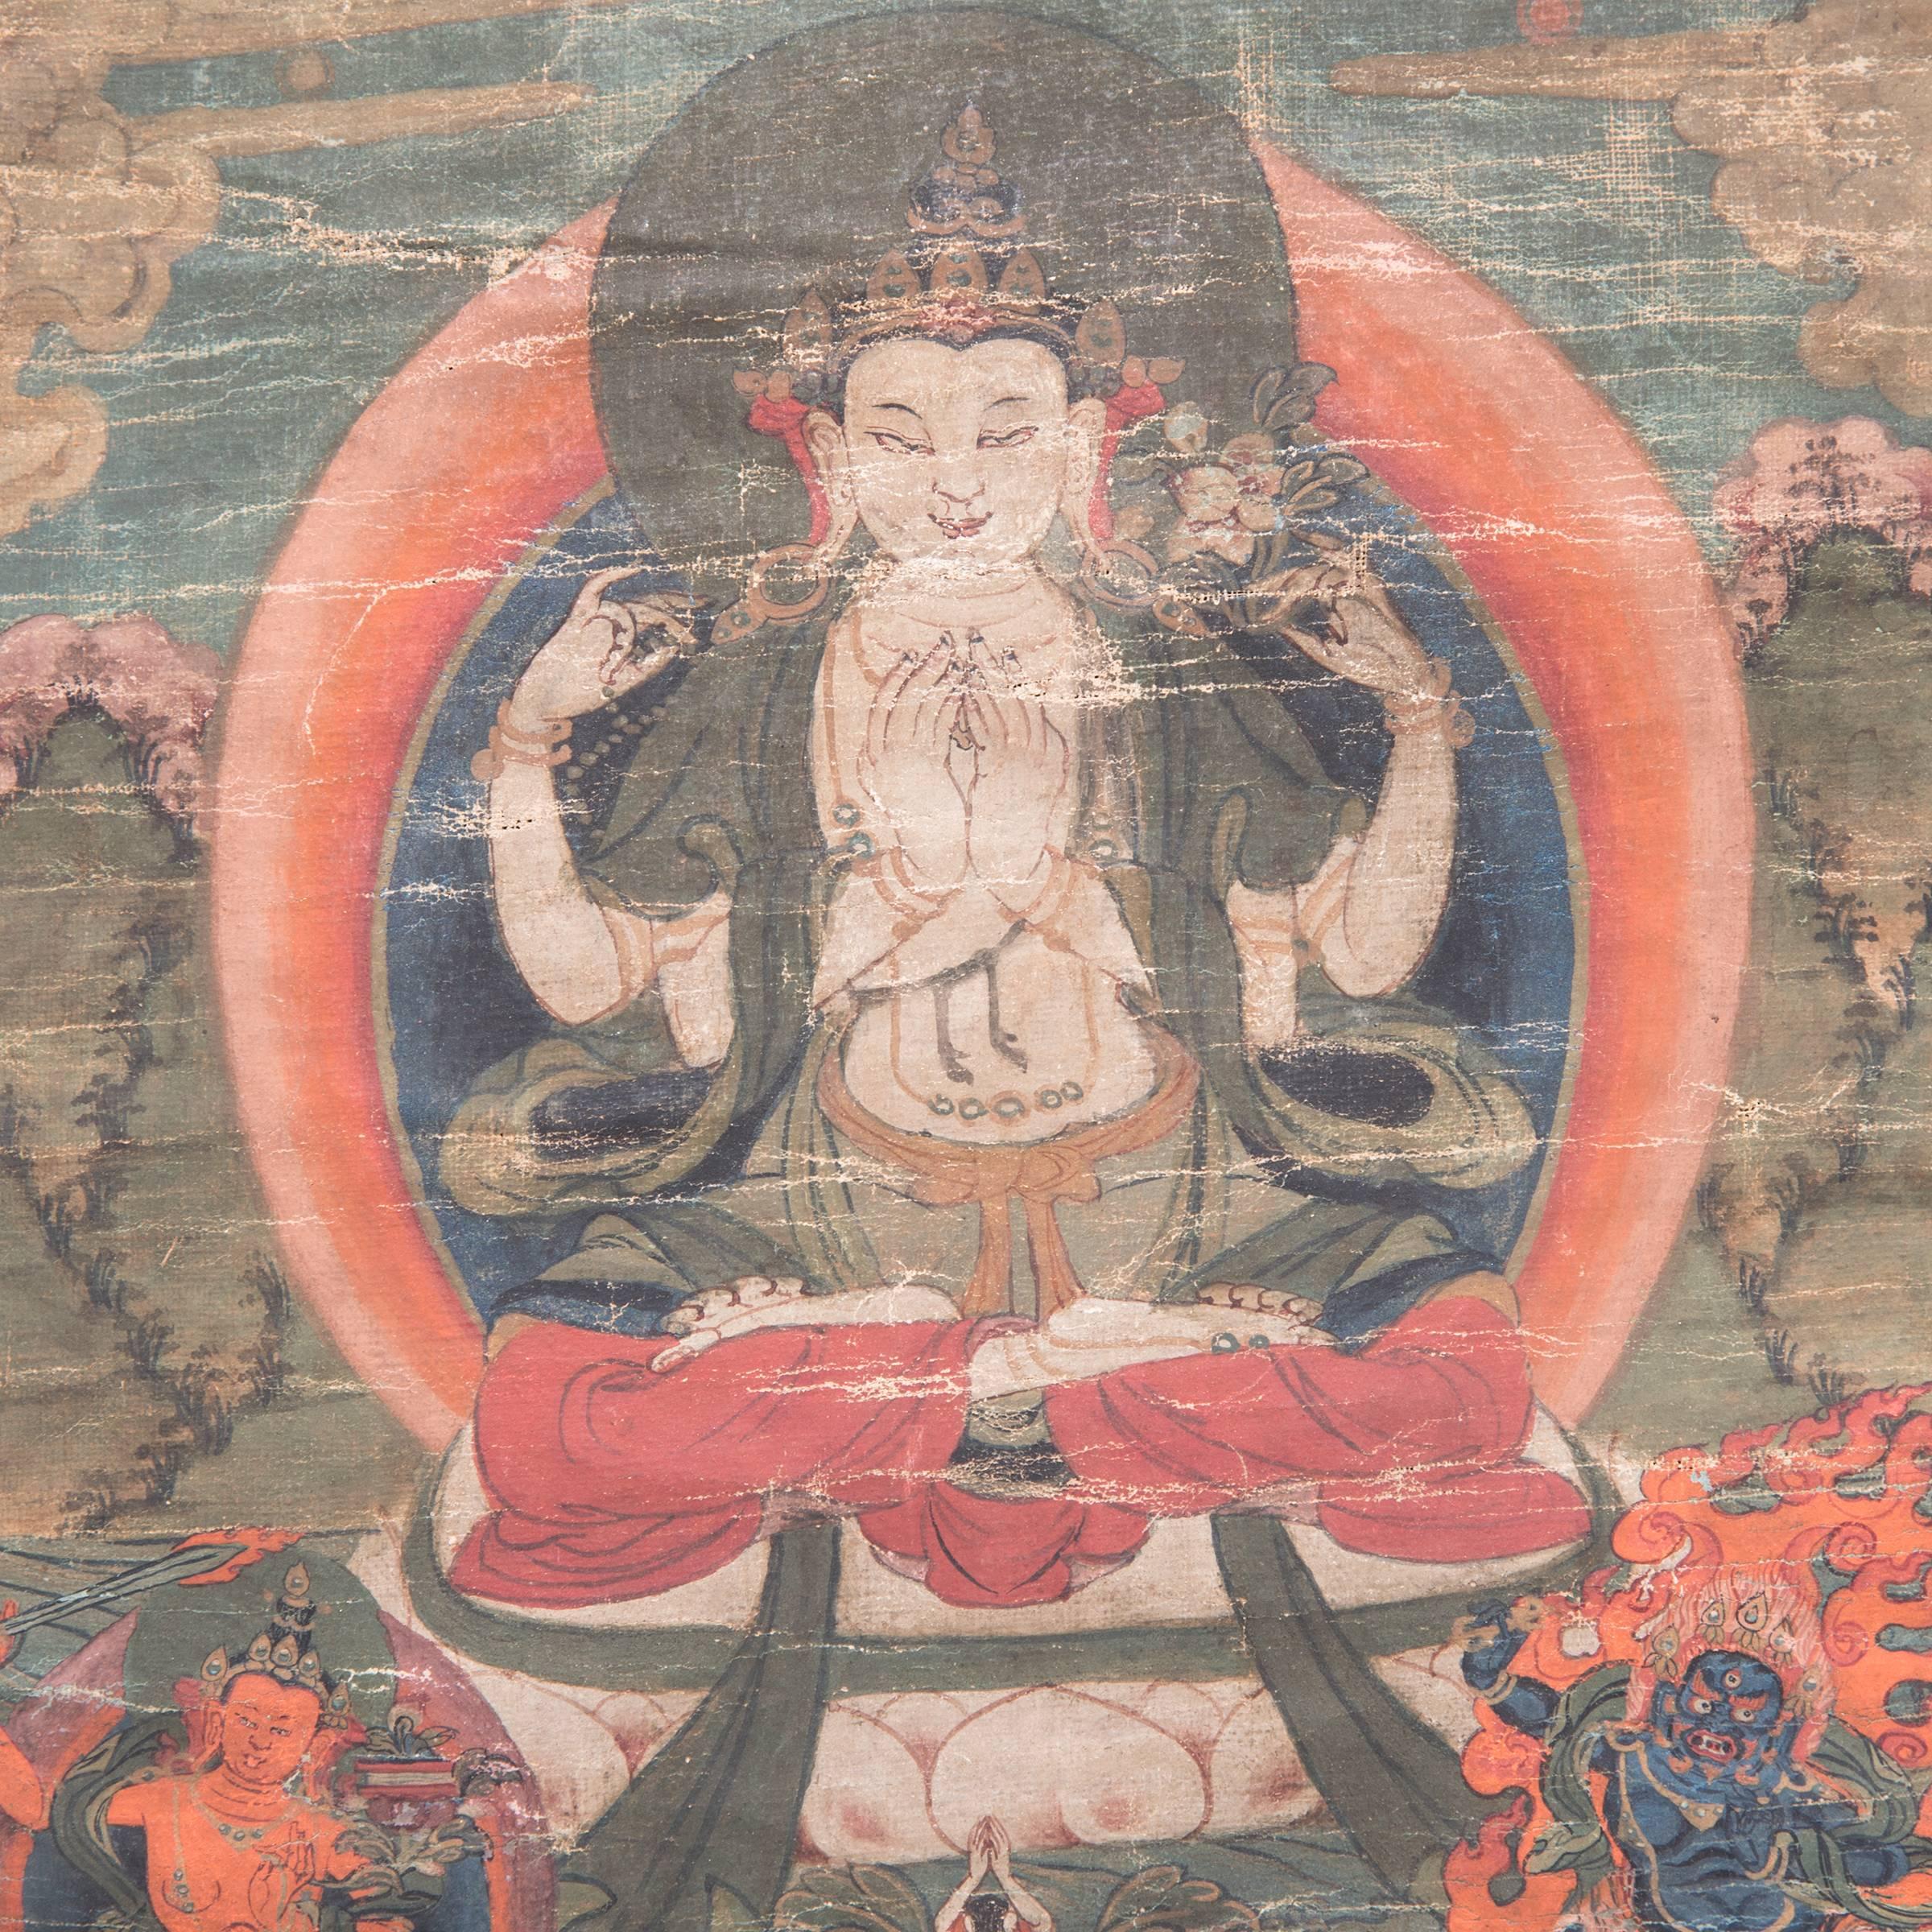 Tibetan Thangka depicting a central Buddha figure before a mandala on a lotus plinth embracing the consort, the lower register having a deity figure emerging from a white lotus flanked by two bodhisattva figures.

 